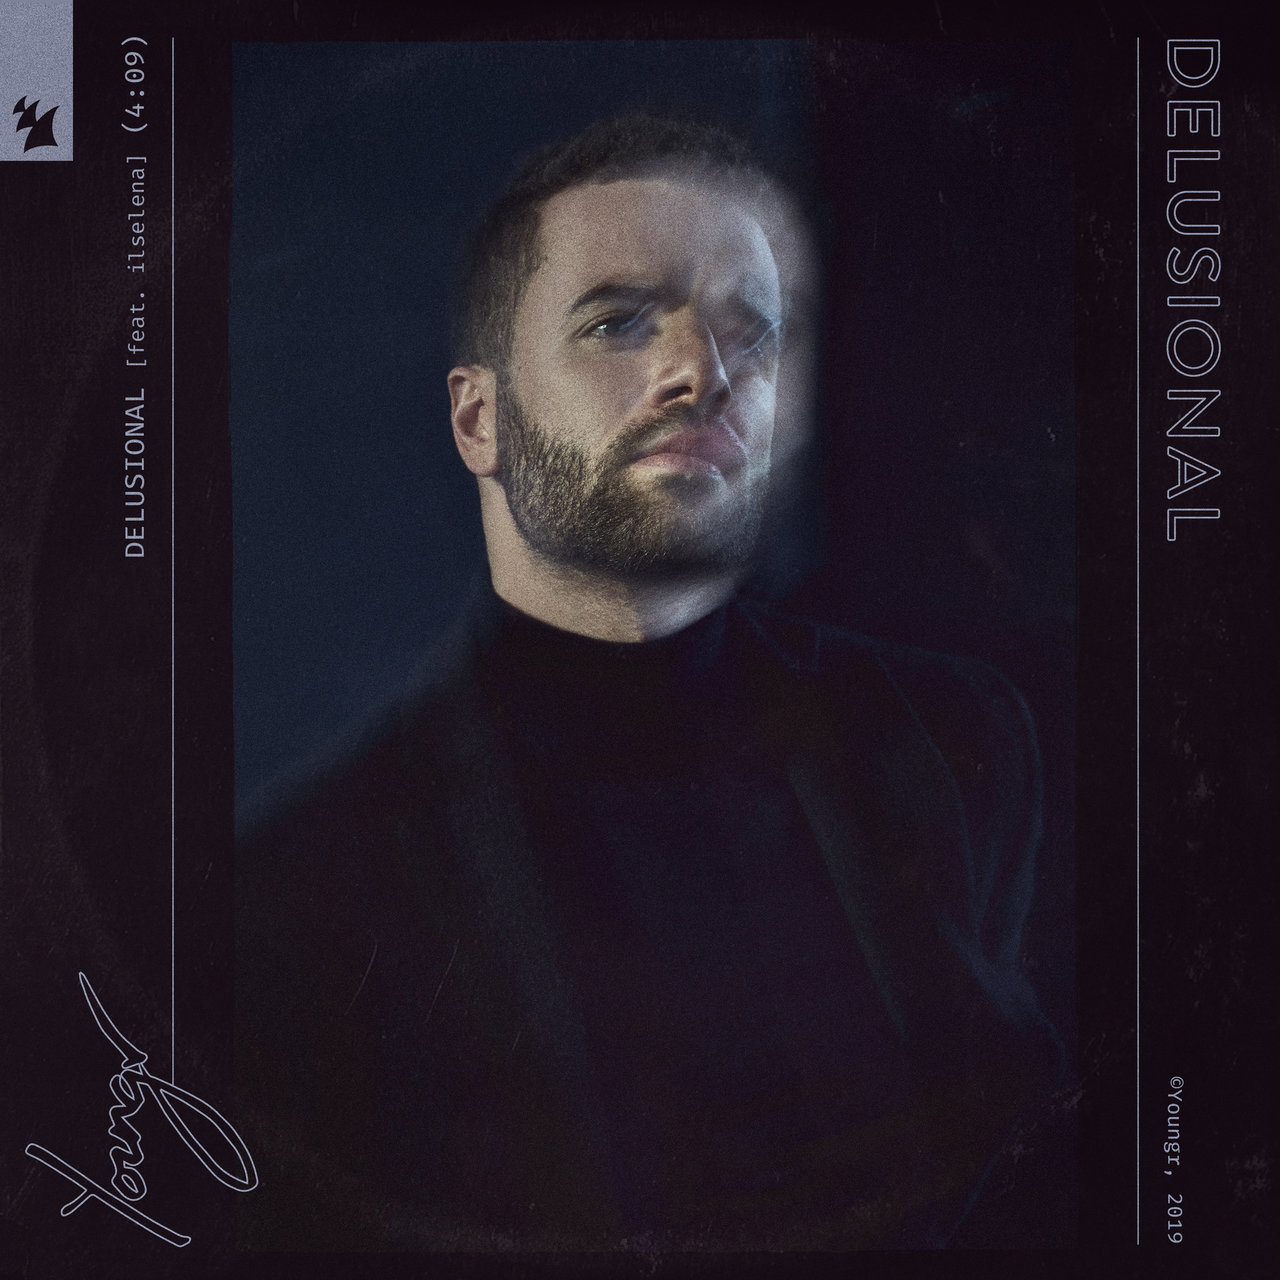 Youngr featuring ilselena — Delusional cover artwork